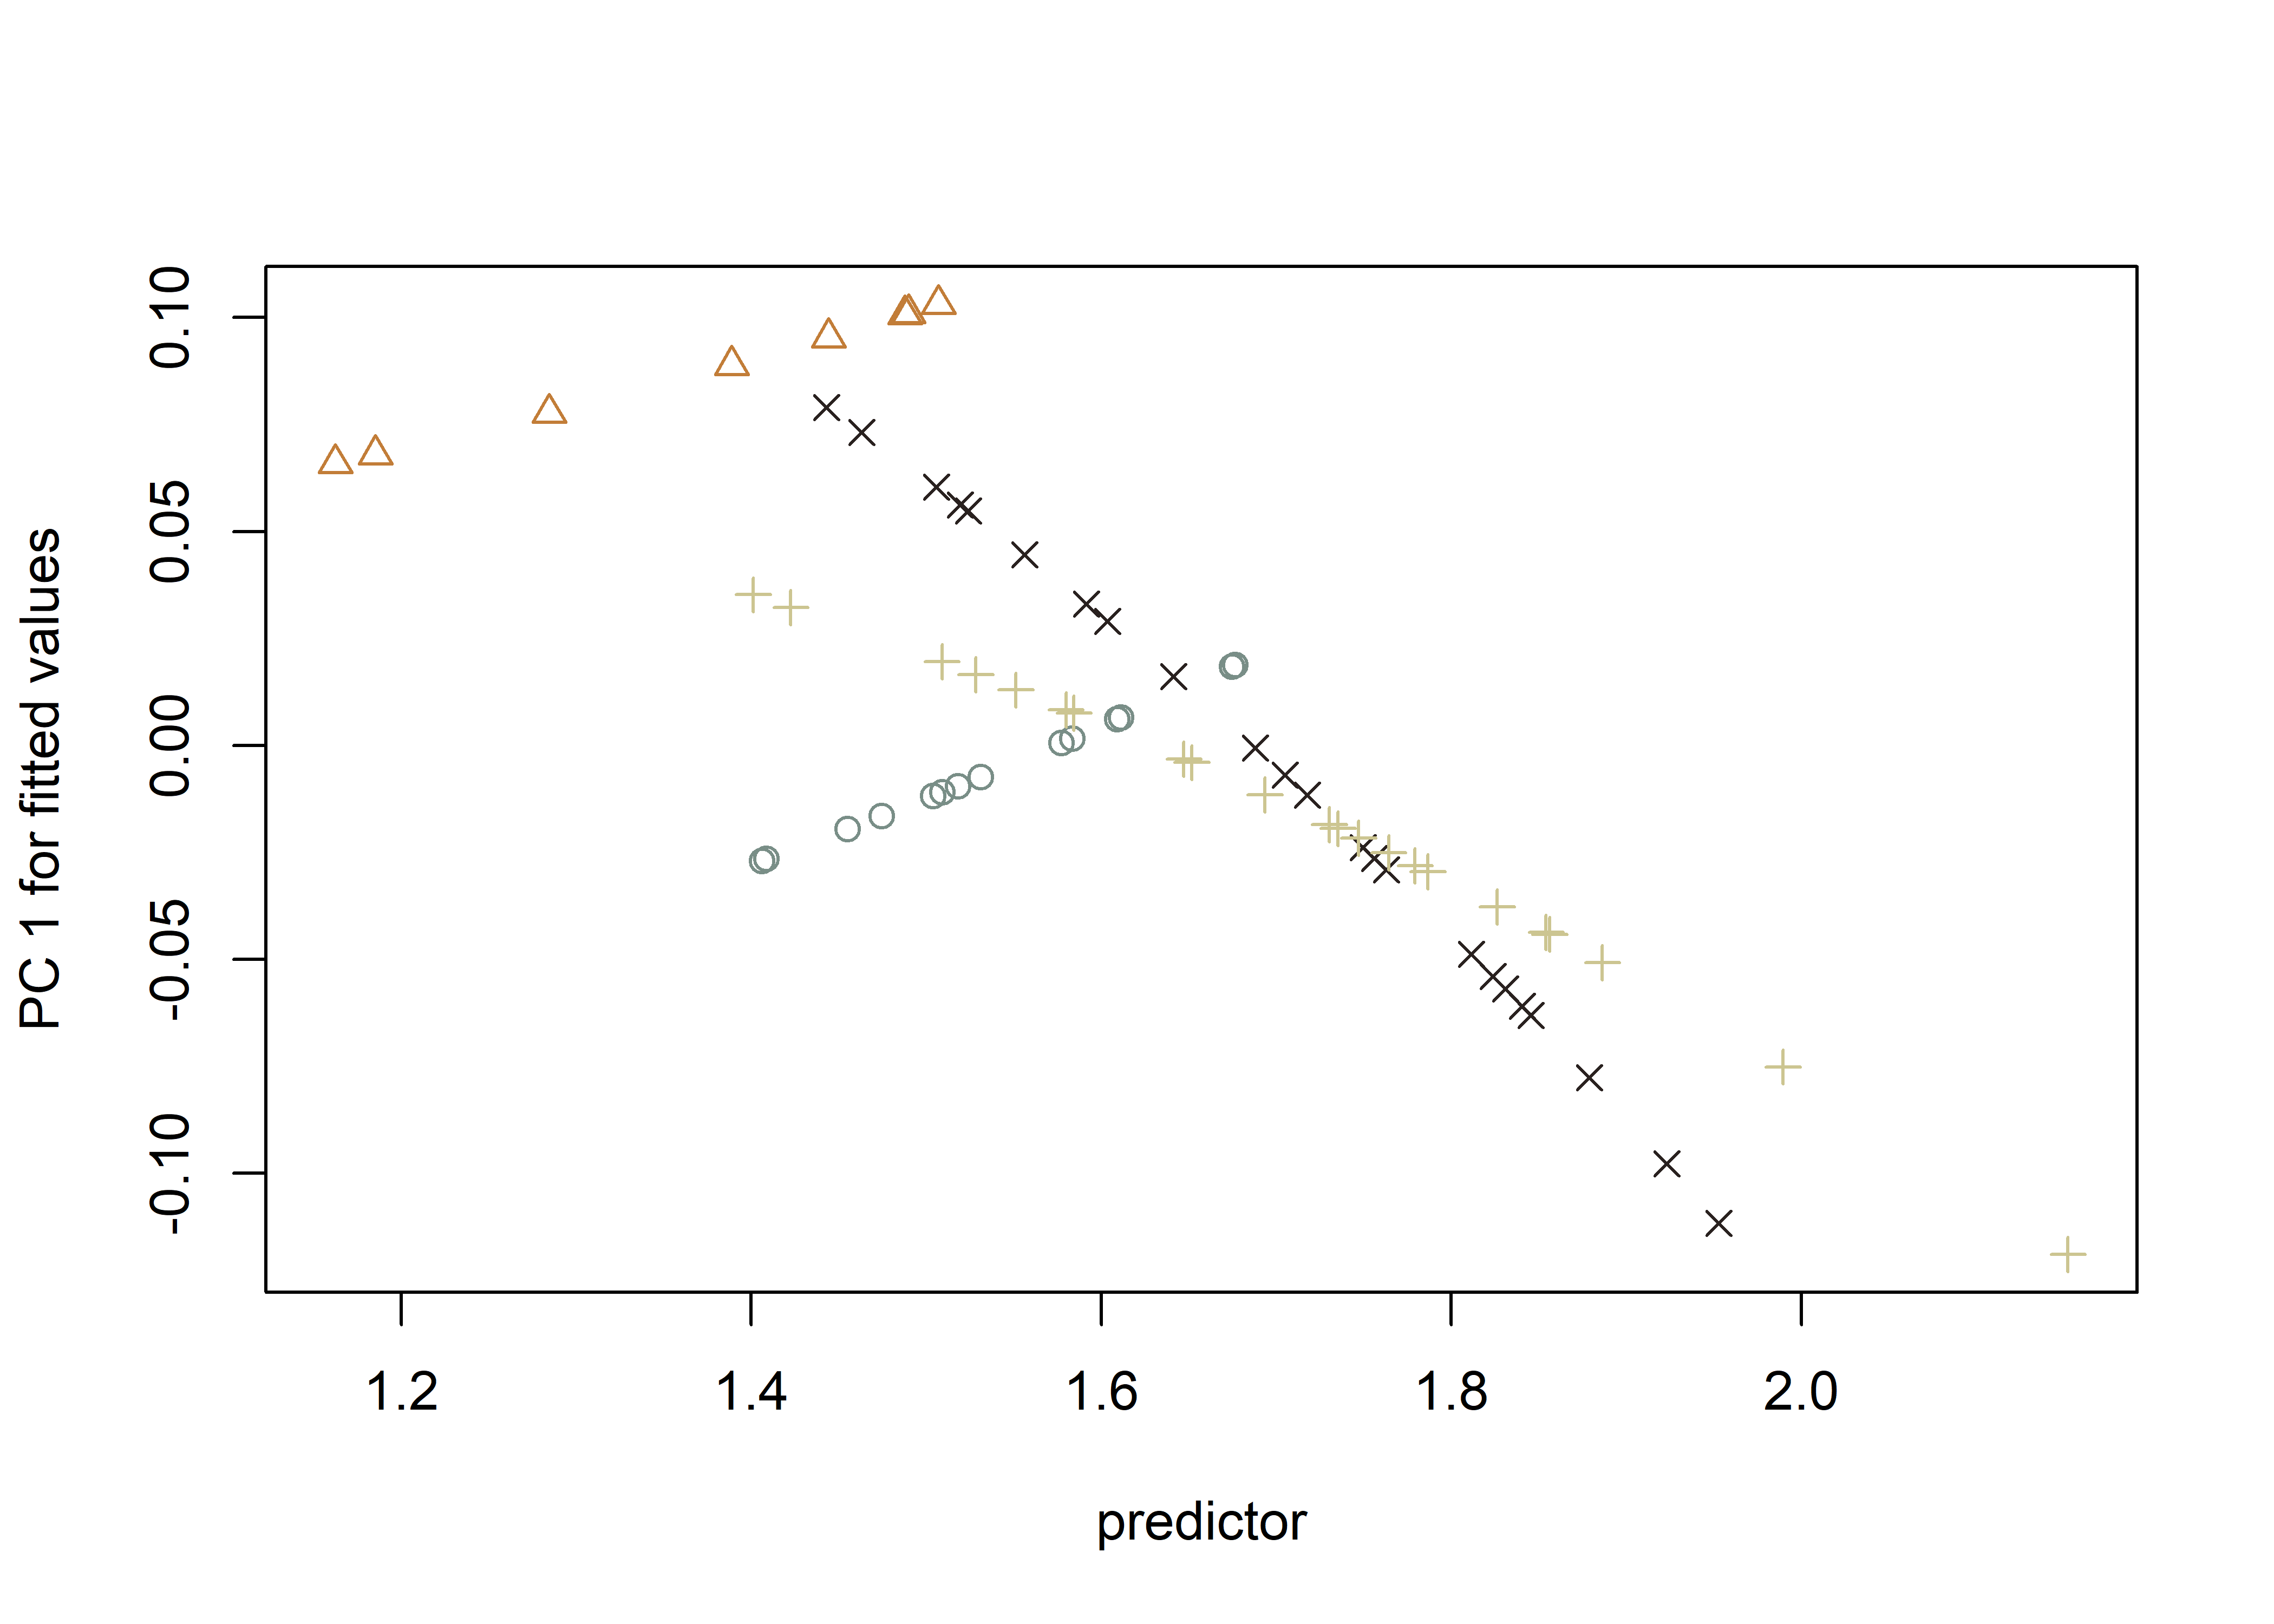 The homogeneity of slopes test indicates that the slopes associated with large and small Perdiz arrow points from the northern and southern behavioural regions differ. This figure plots the first principal component of _predicted_ values versus _size_ as a stylized graphic of the allometric trend. 